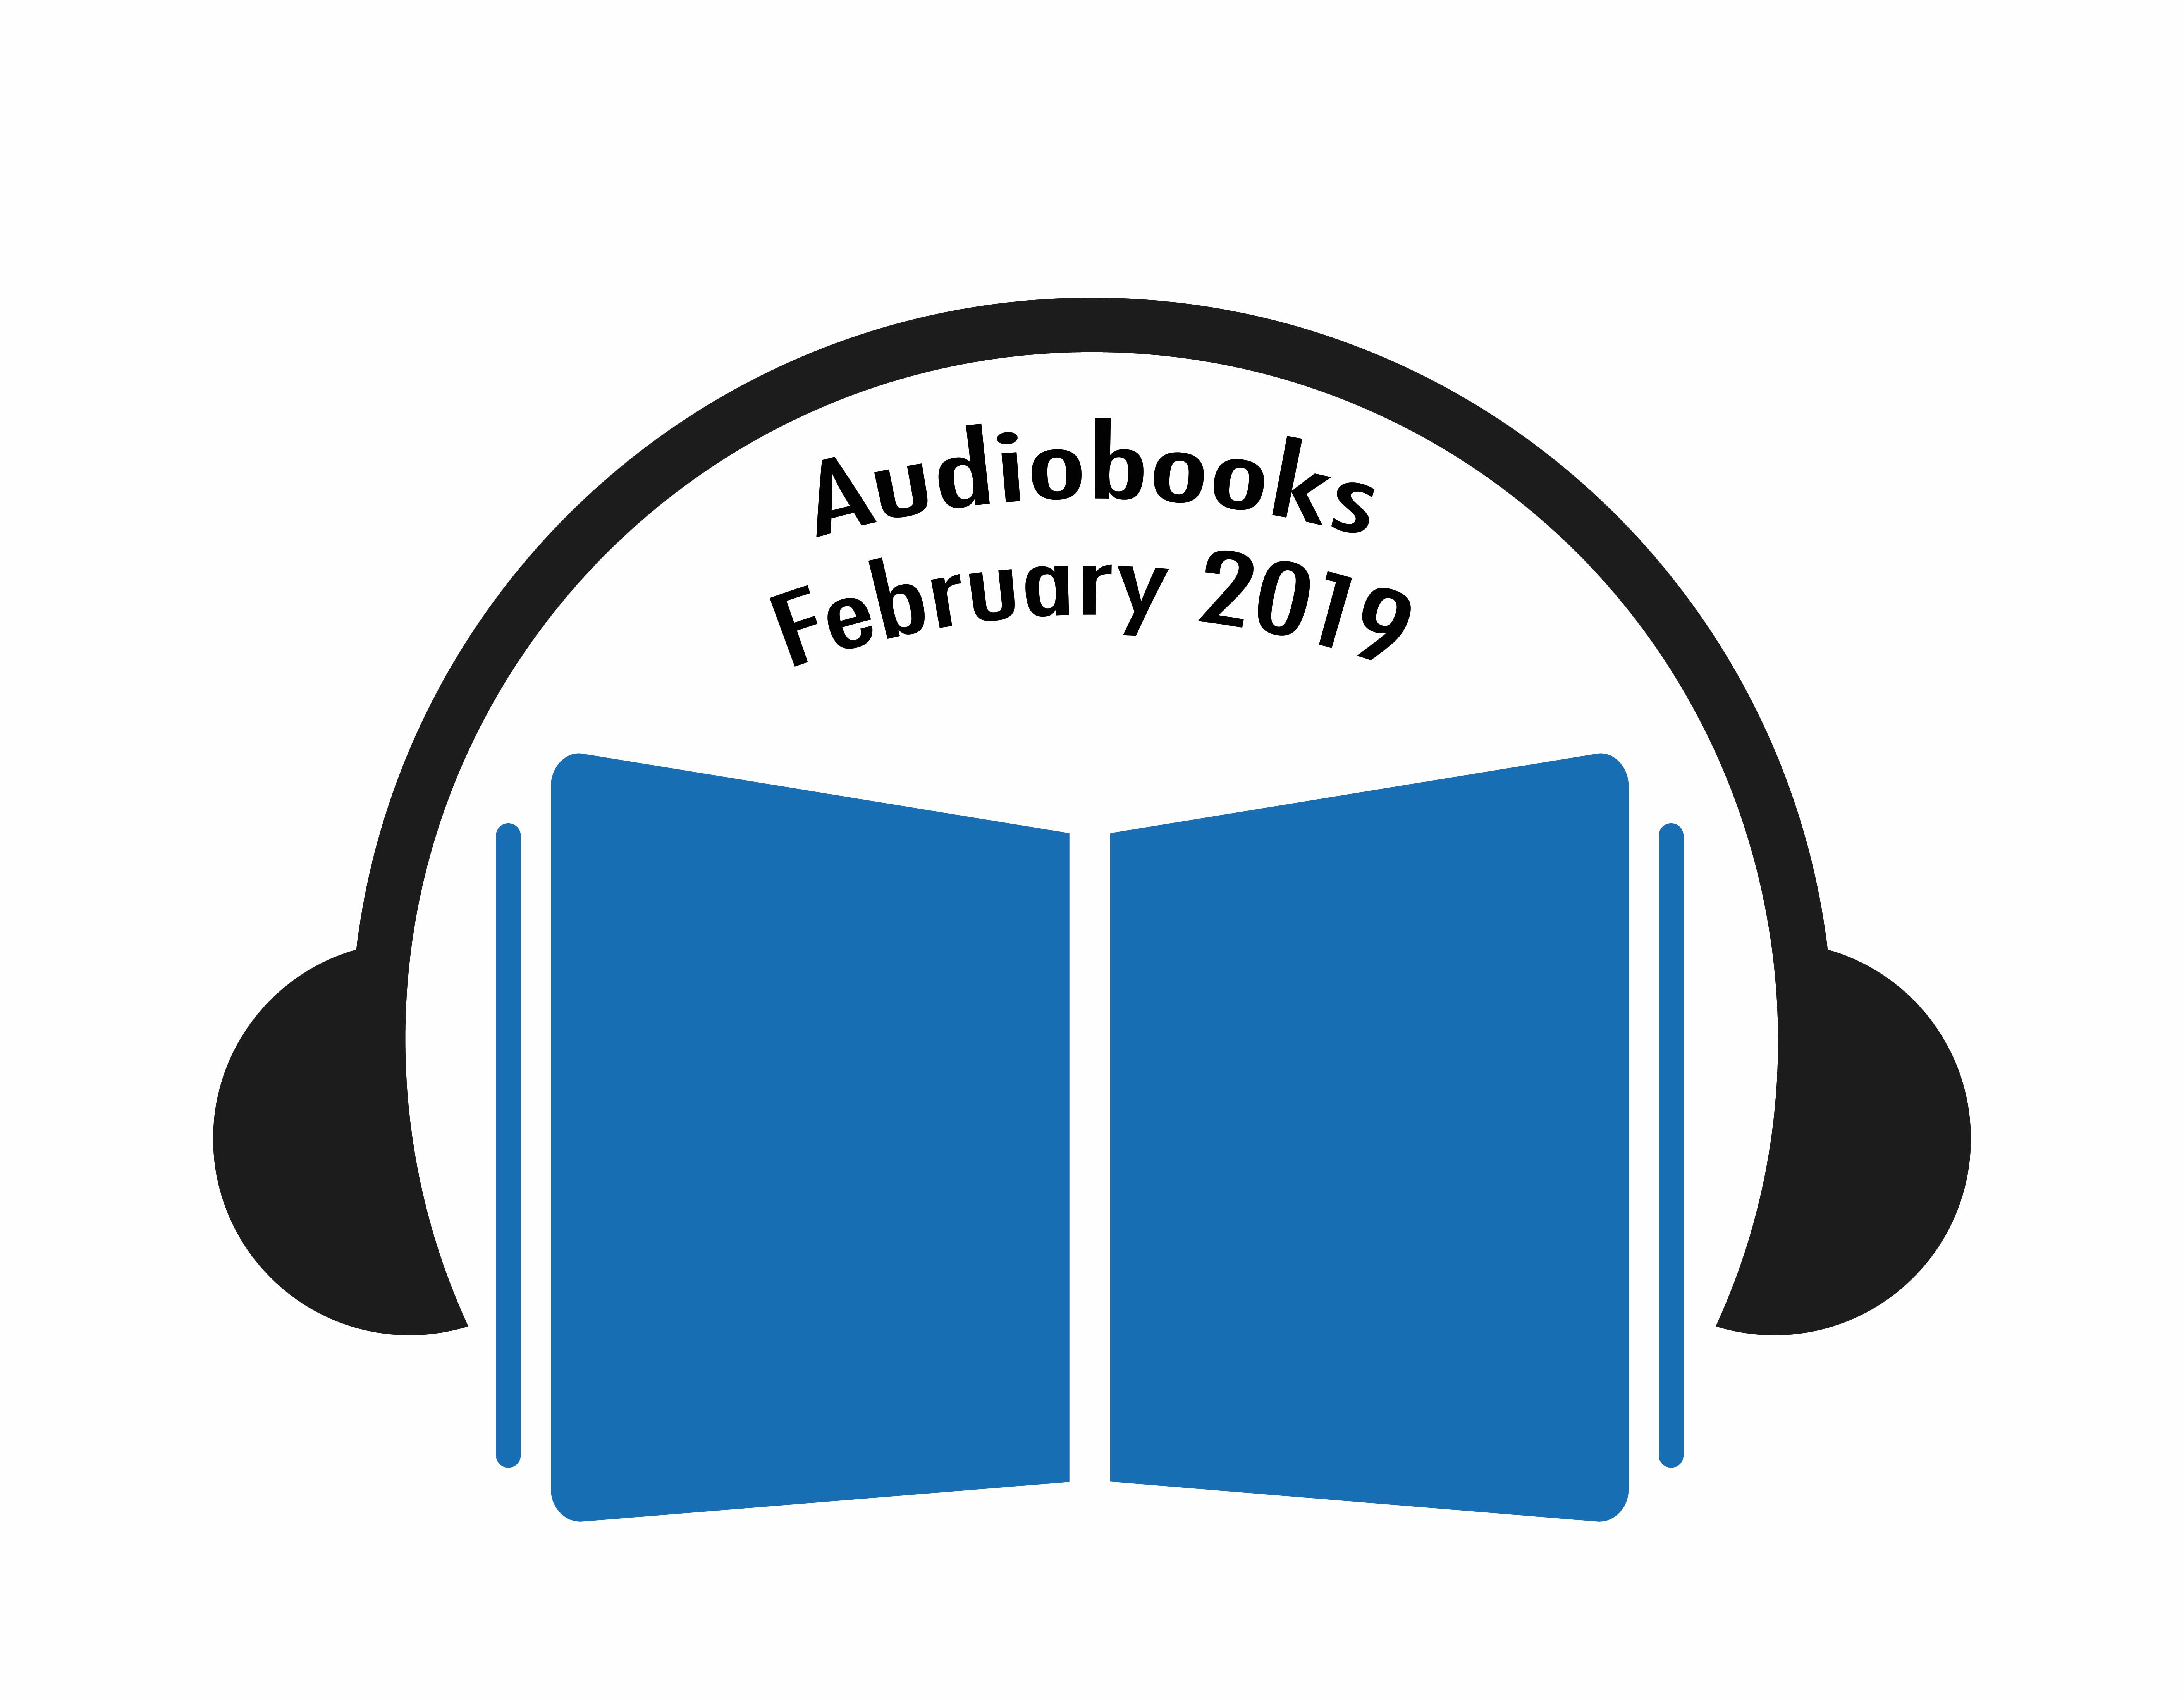 A graphic featuring an open book in blue with a pair of black headphones surrounding it, symbolizing listening to audiobooks, with the text "audiobooks february 2019" above it.